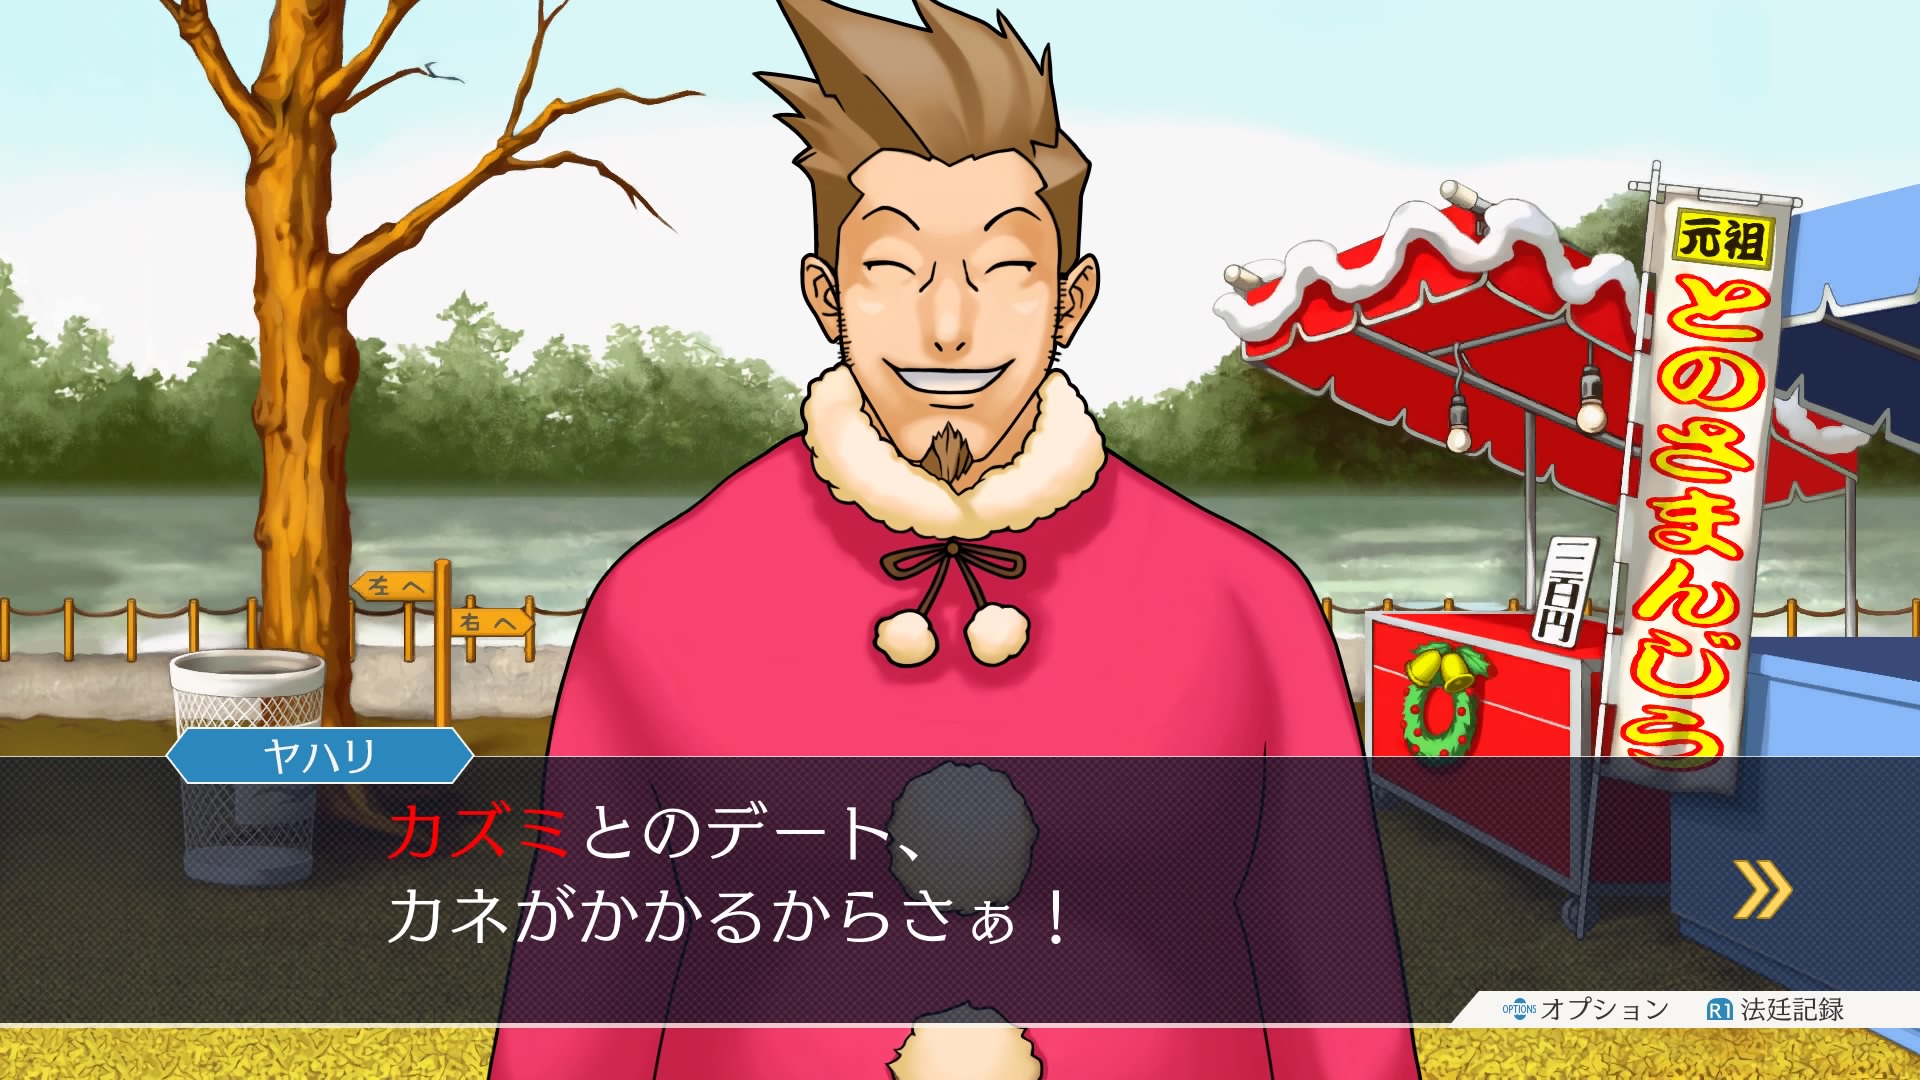 Phoenix Wright: Ace Attorney Trilogy – new Pearl Fey and Larry Butz screenshots ...1920 x 1080